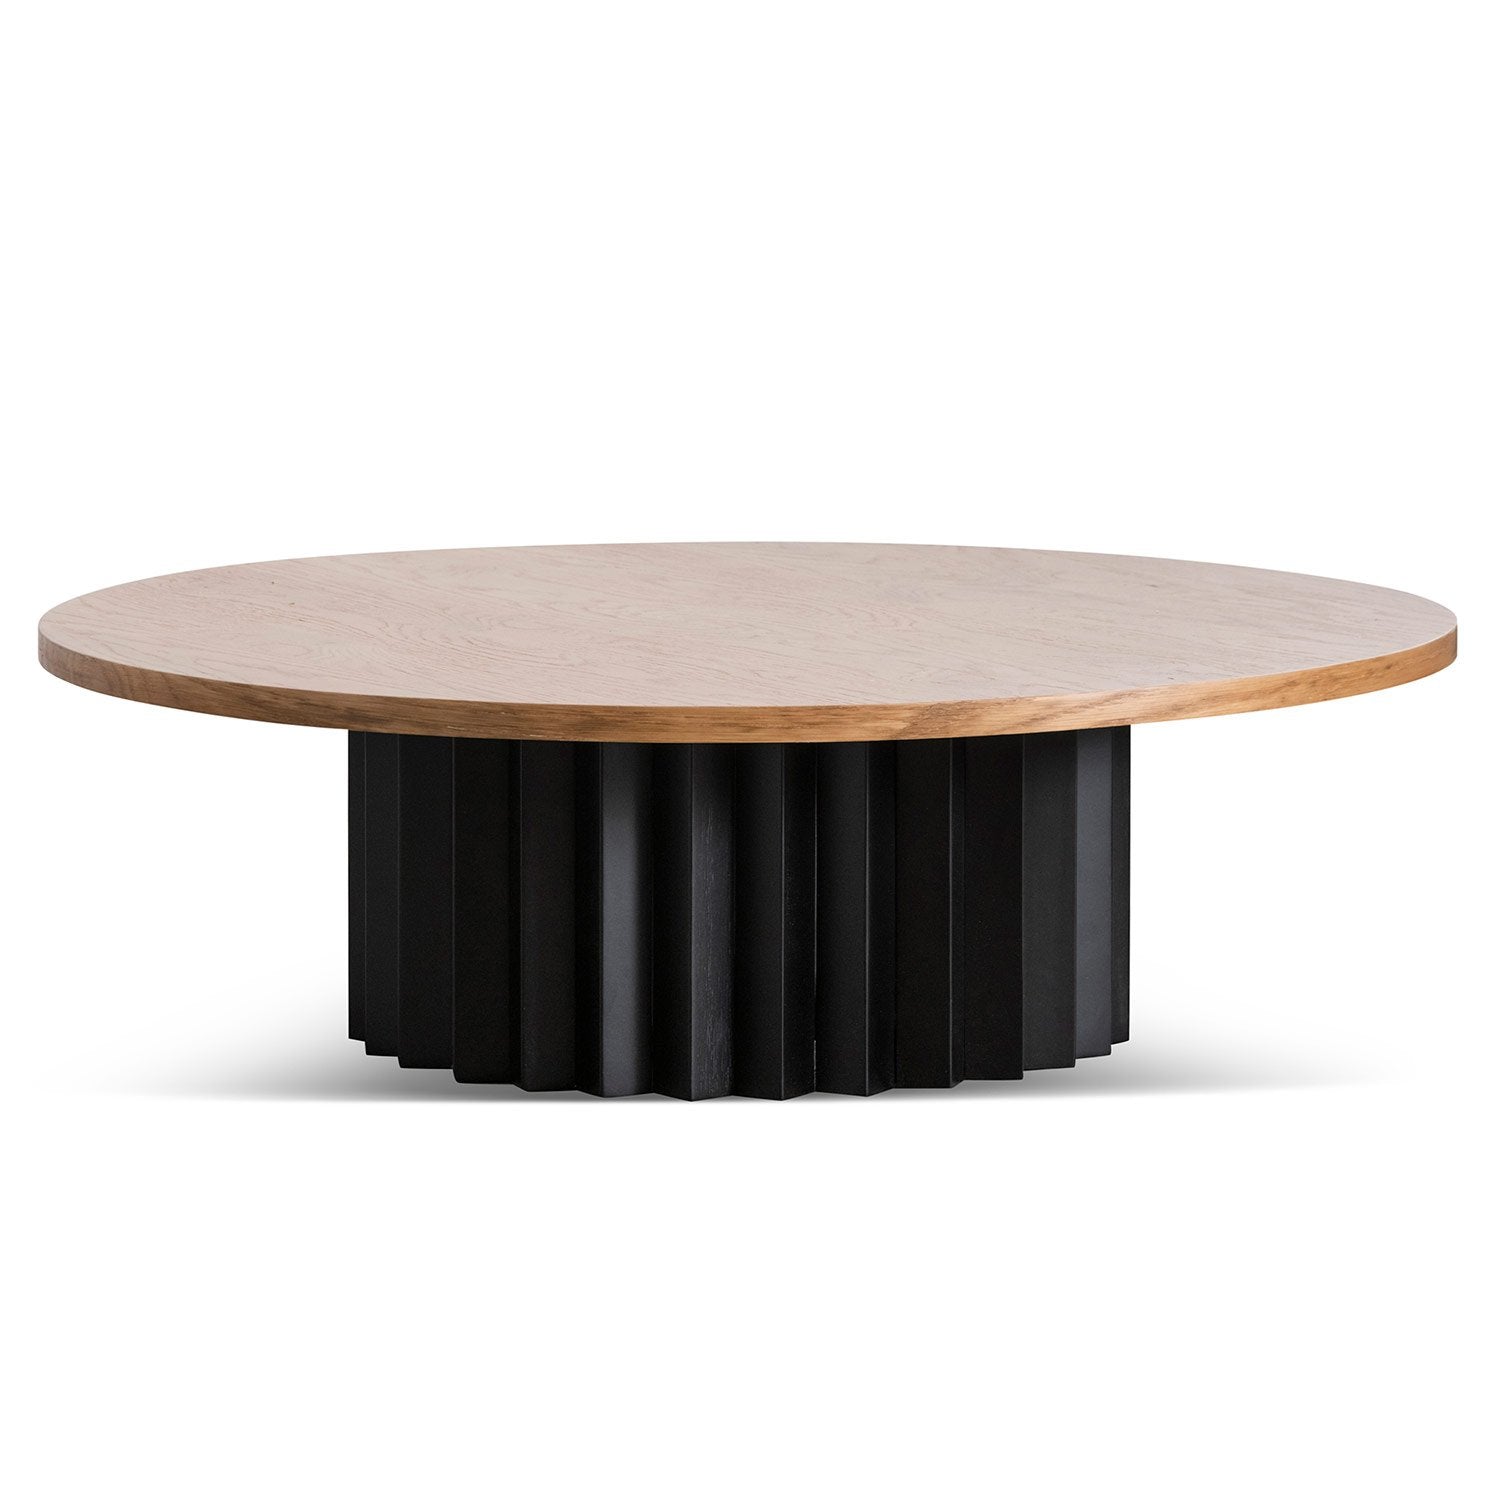 Liam Round Messmate Coffee Table - Coffee Table